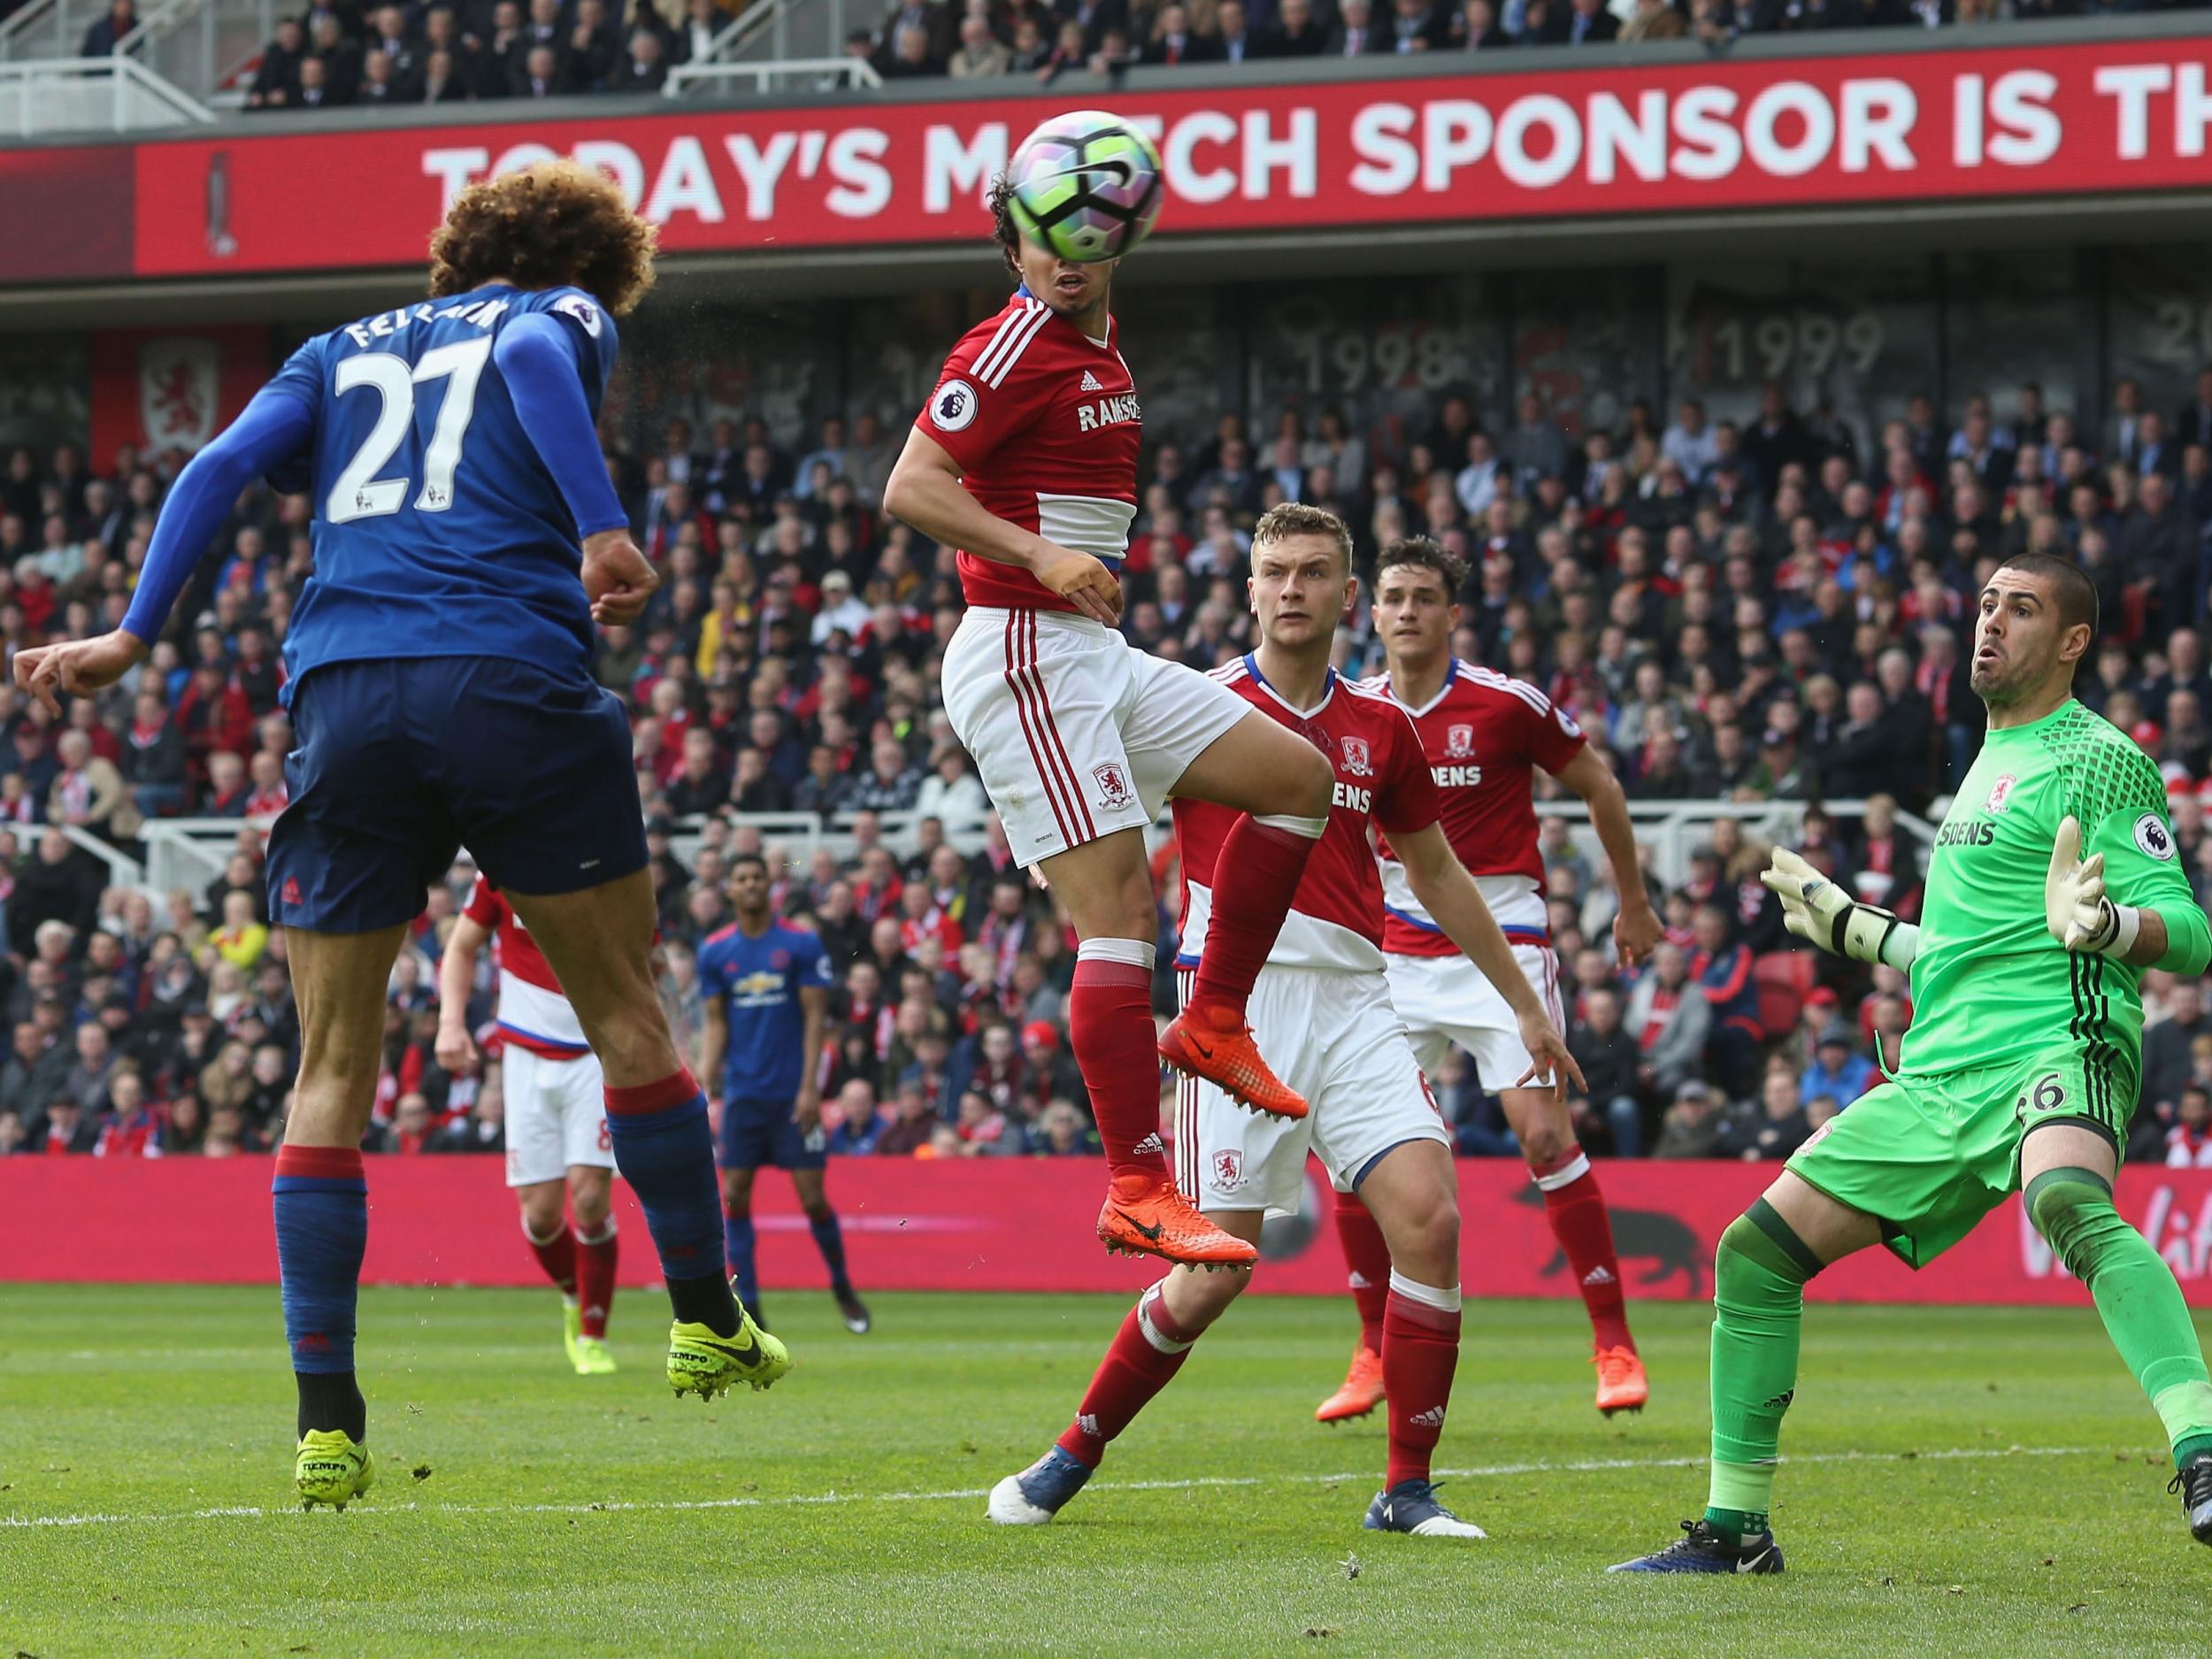 Fellaini put his side in the lead with a towering header (Getty )